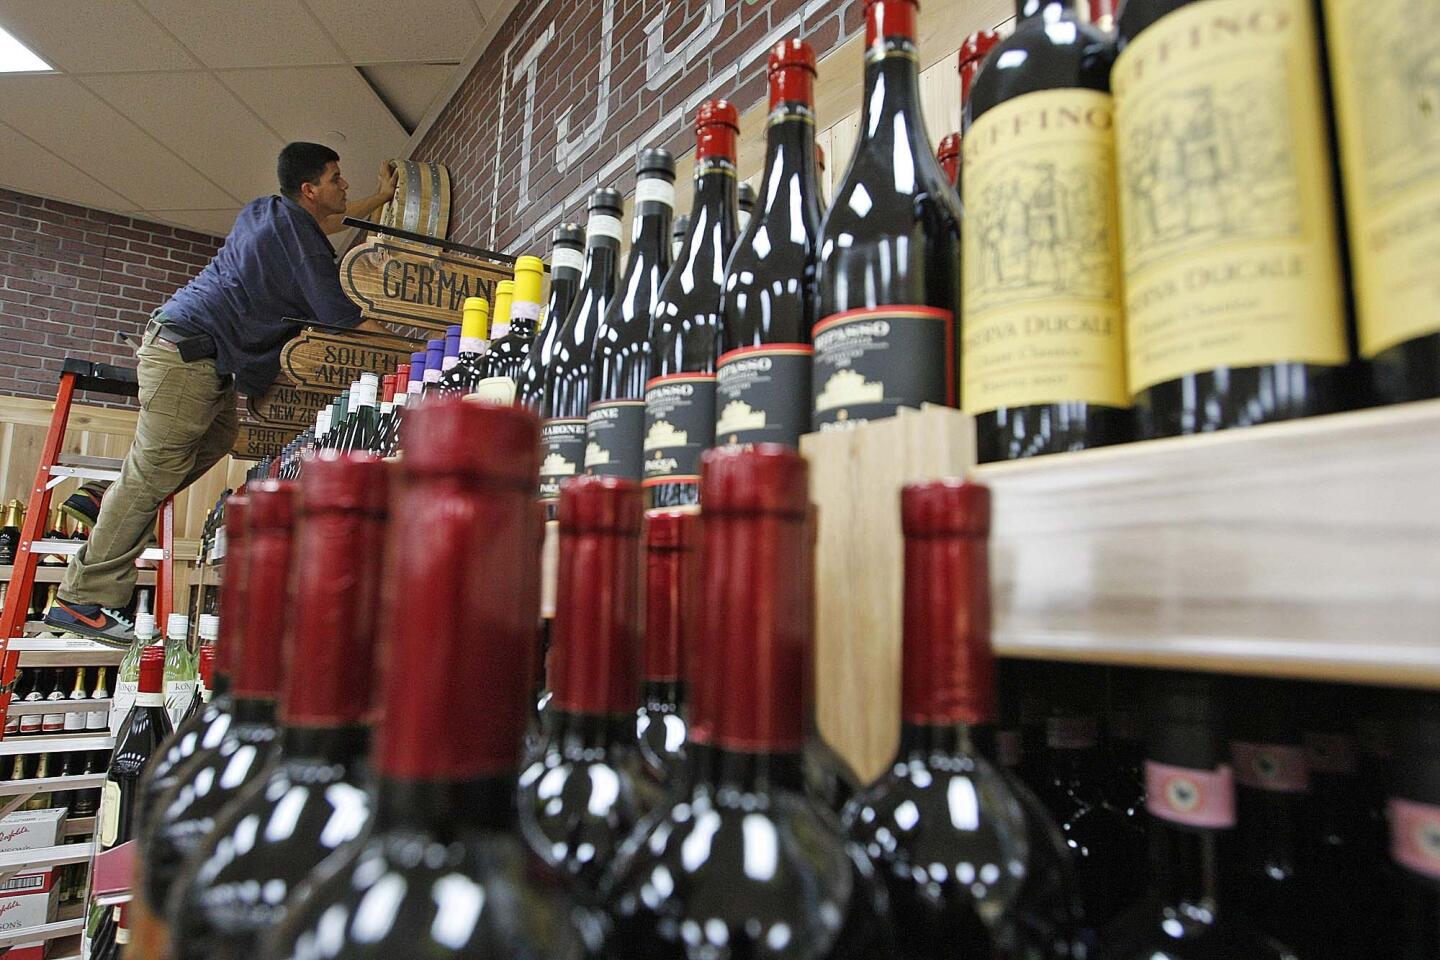 In the past, shoppers could find some wild, terrific wine buys at Trader Joe¿s. But the days of finding those kinds of wines on close-out seem to be long gone.